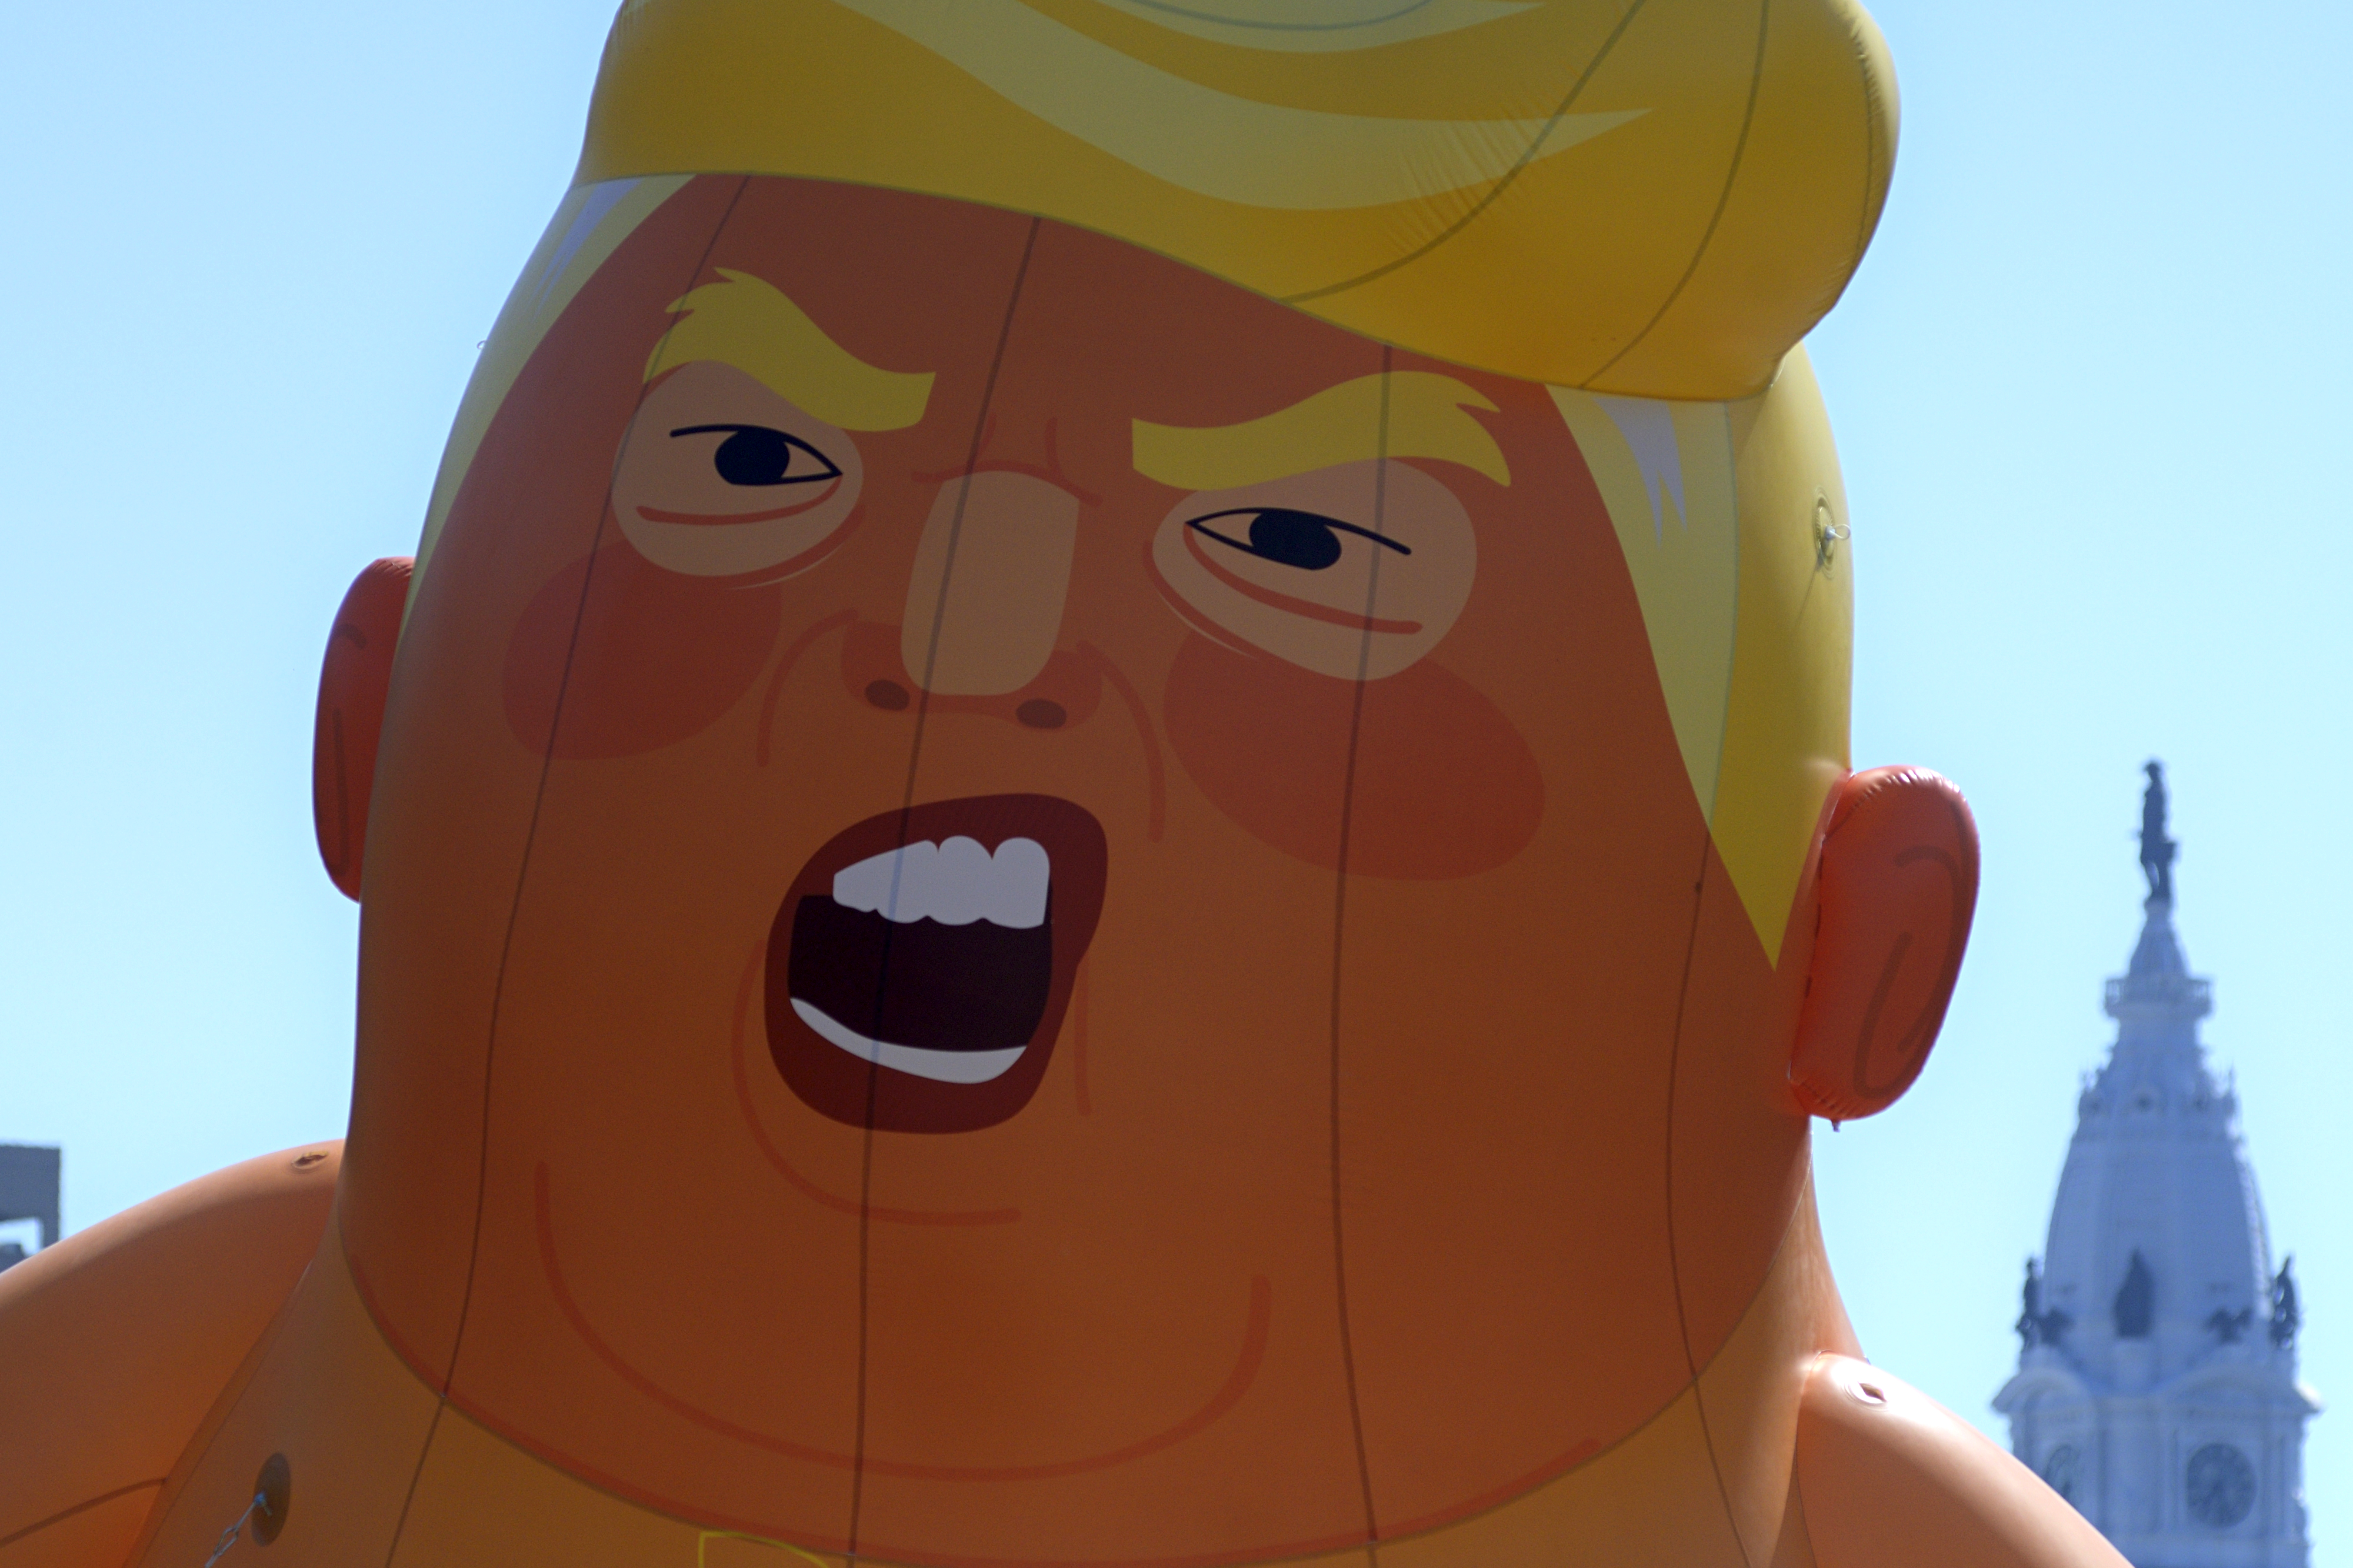 The Baby Trump balloon participates in a Peoples March for Puerto Rico, commemorating the second anniversary of Hurricane Maria, at a protest march in Philadelphia on Sept. 21, 2019. (Bastiaan Slabbers&mdash;NurPhoto/Getty Images)